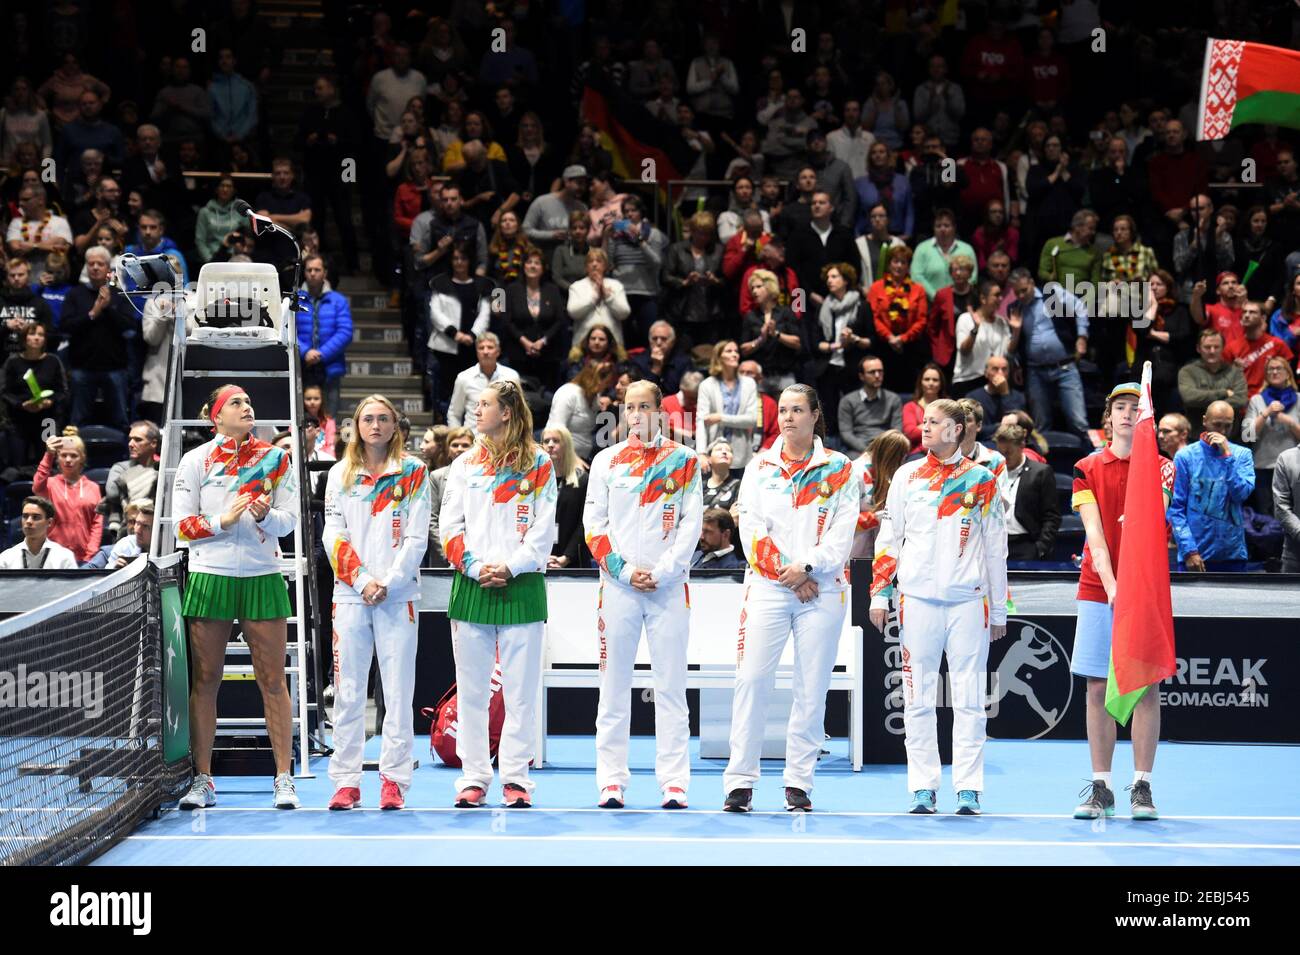 Tennis - Fed Cup - Fed Cup World Group - First Round - Germany v Belarus -  Volkswagen Halle Braunschweig, Braunschweig, Germany - February 10, 2019  Belarus team line up before the match REUTERS/Fabian Bimmer Stock Photo -  Alamy